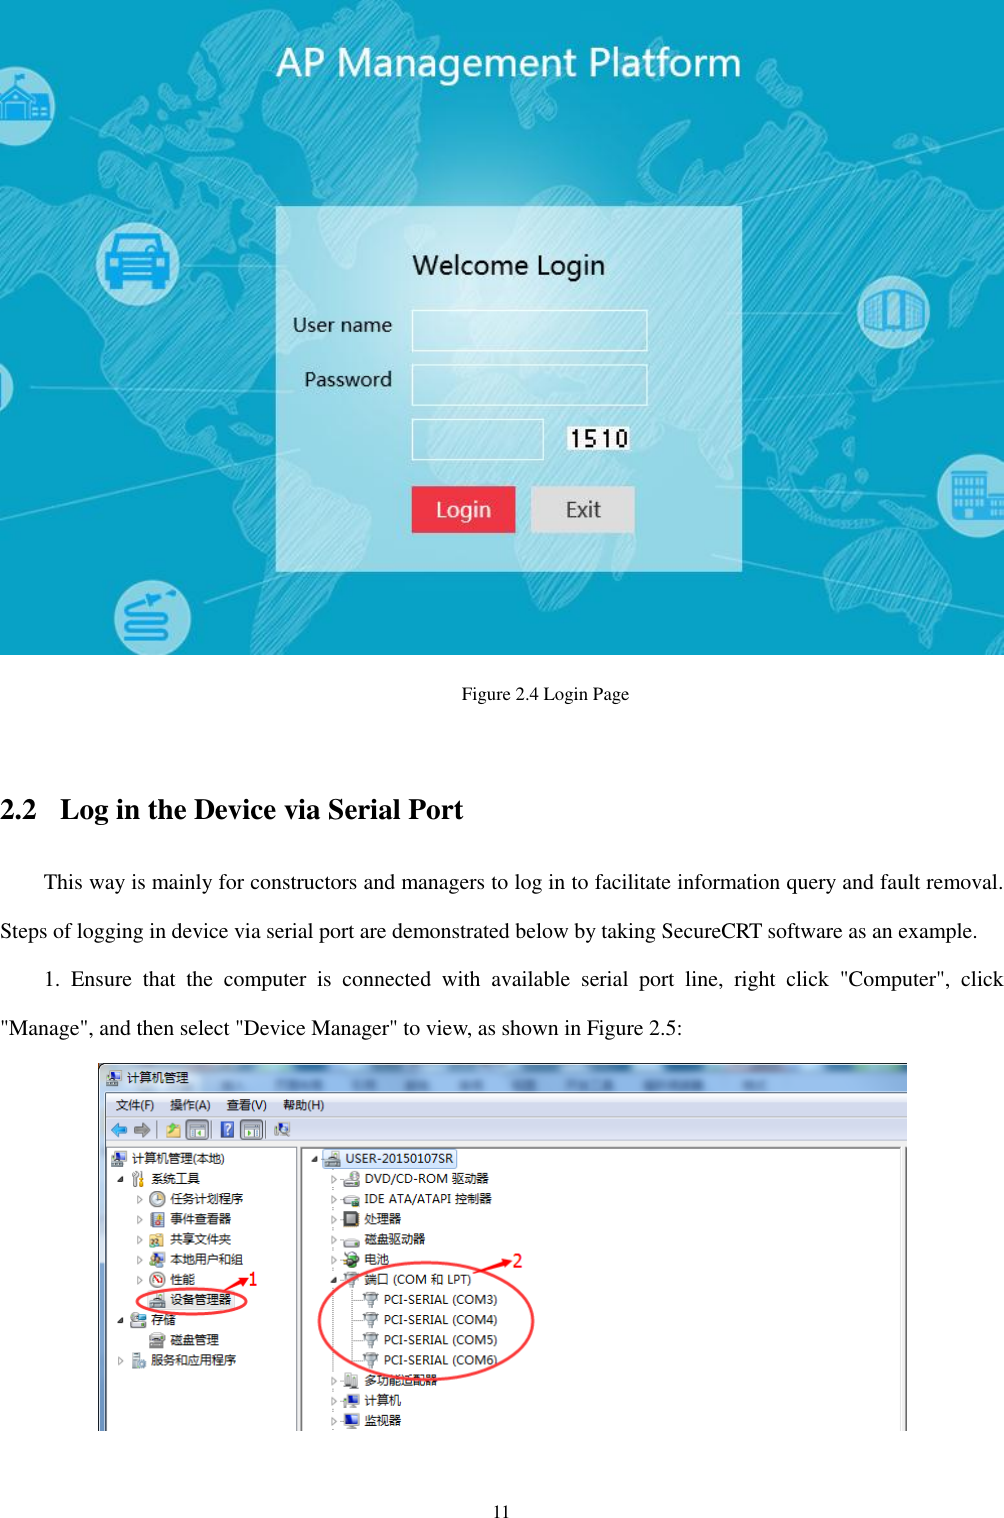 11  Figure 2.4 Login Page    2.2 Log in the Device via Serial Port This way is mainly for constructors and managers to log in to facilitate information query and fault removal. Steps of logging in device via serial port are demonstrated below by taking SecureCRT software as an example.   1.  Ensure  that  the  computer  is  connected  with  available  serial  port  line,  right  click  &quot;Computer&quot;,  click &quot;Manage&quot;, and then select &quot;Device Manager&quot; to view, as shown in Figure 2.5:    